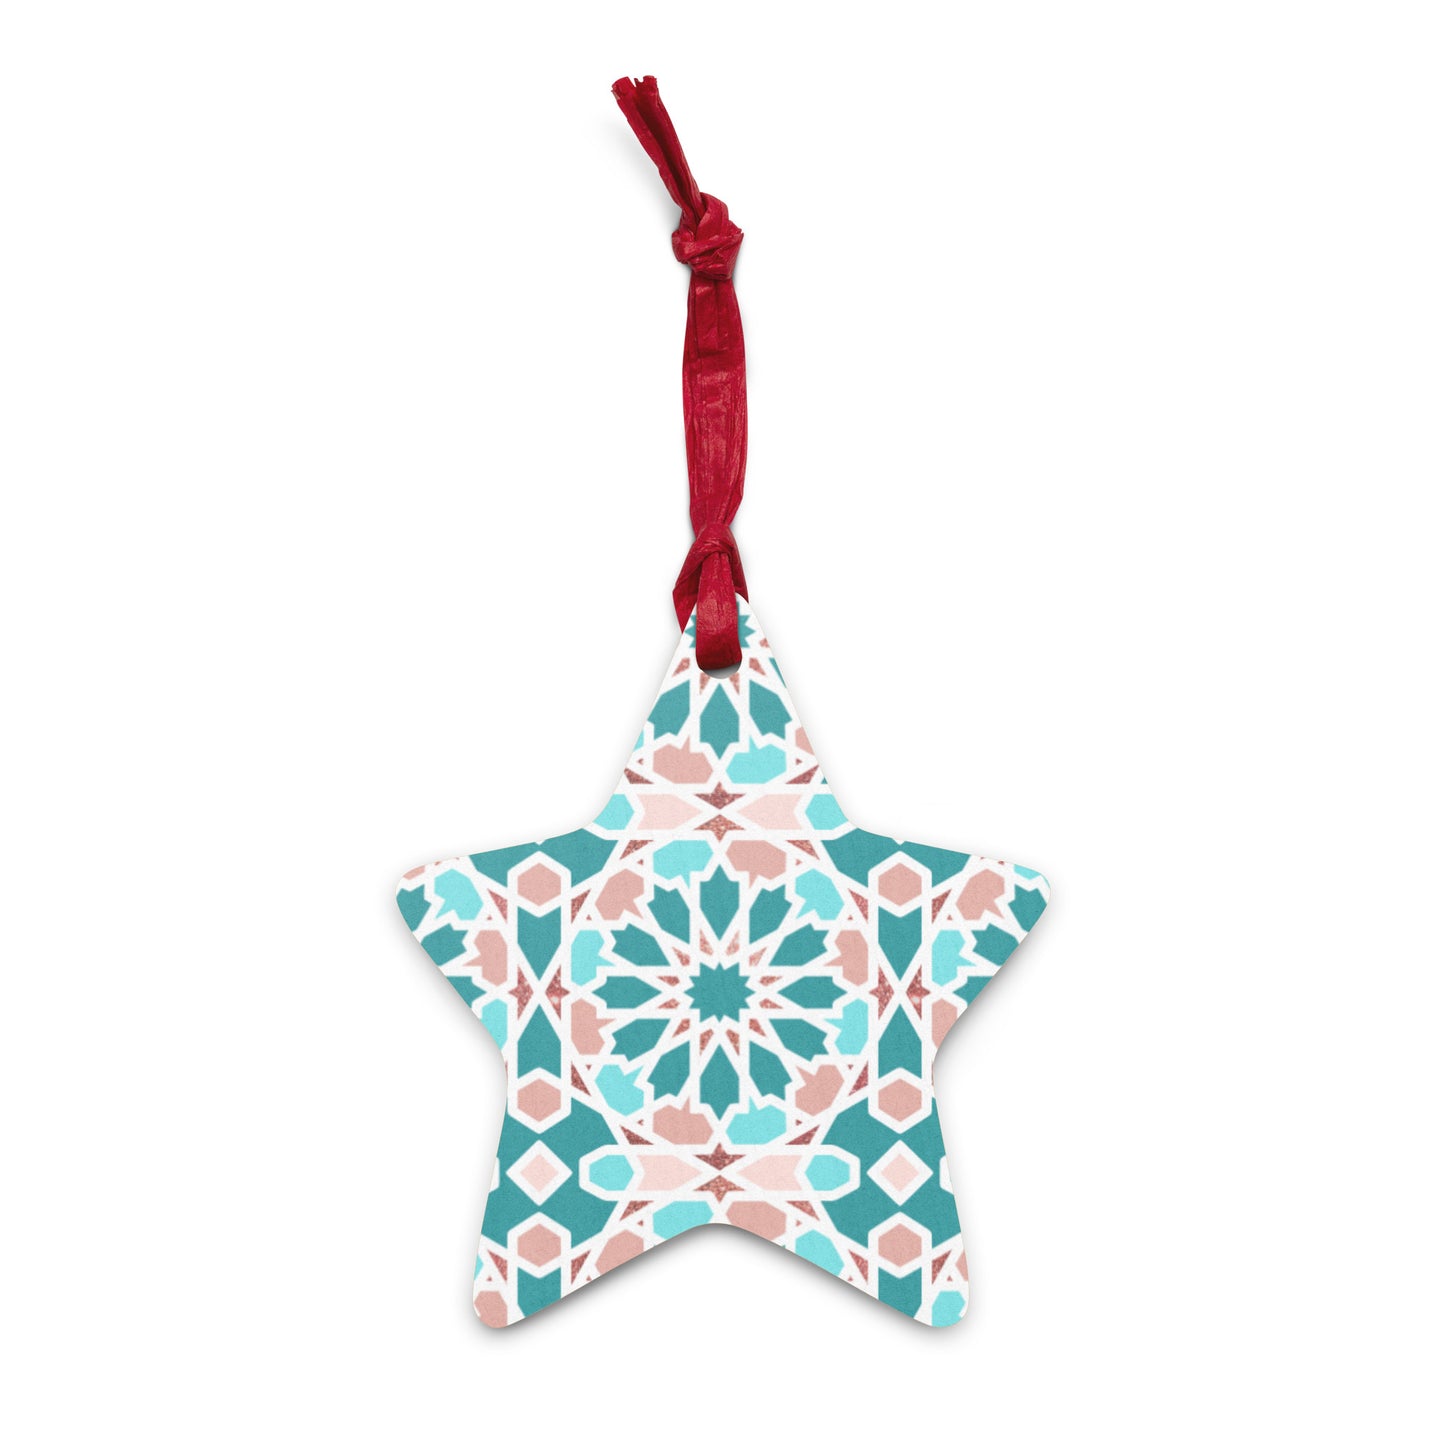 Wooden Holiday Ornaments - Arabian Geometric Star in Red Sea Colors